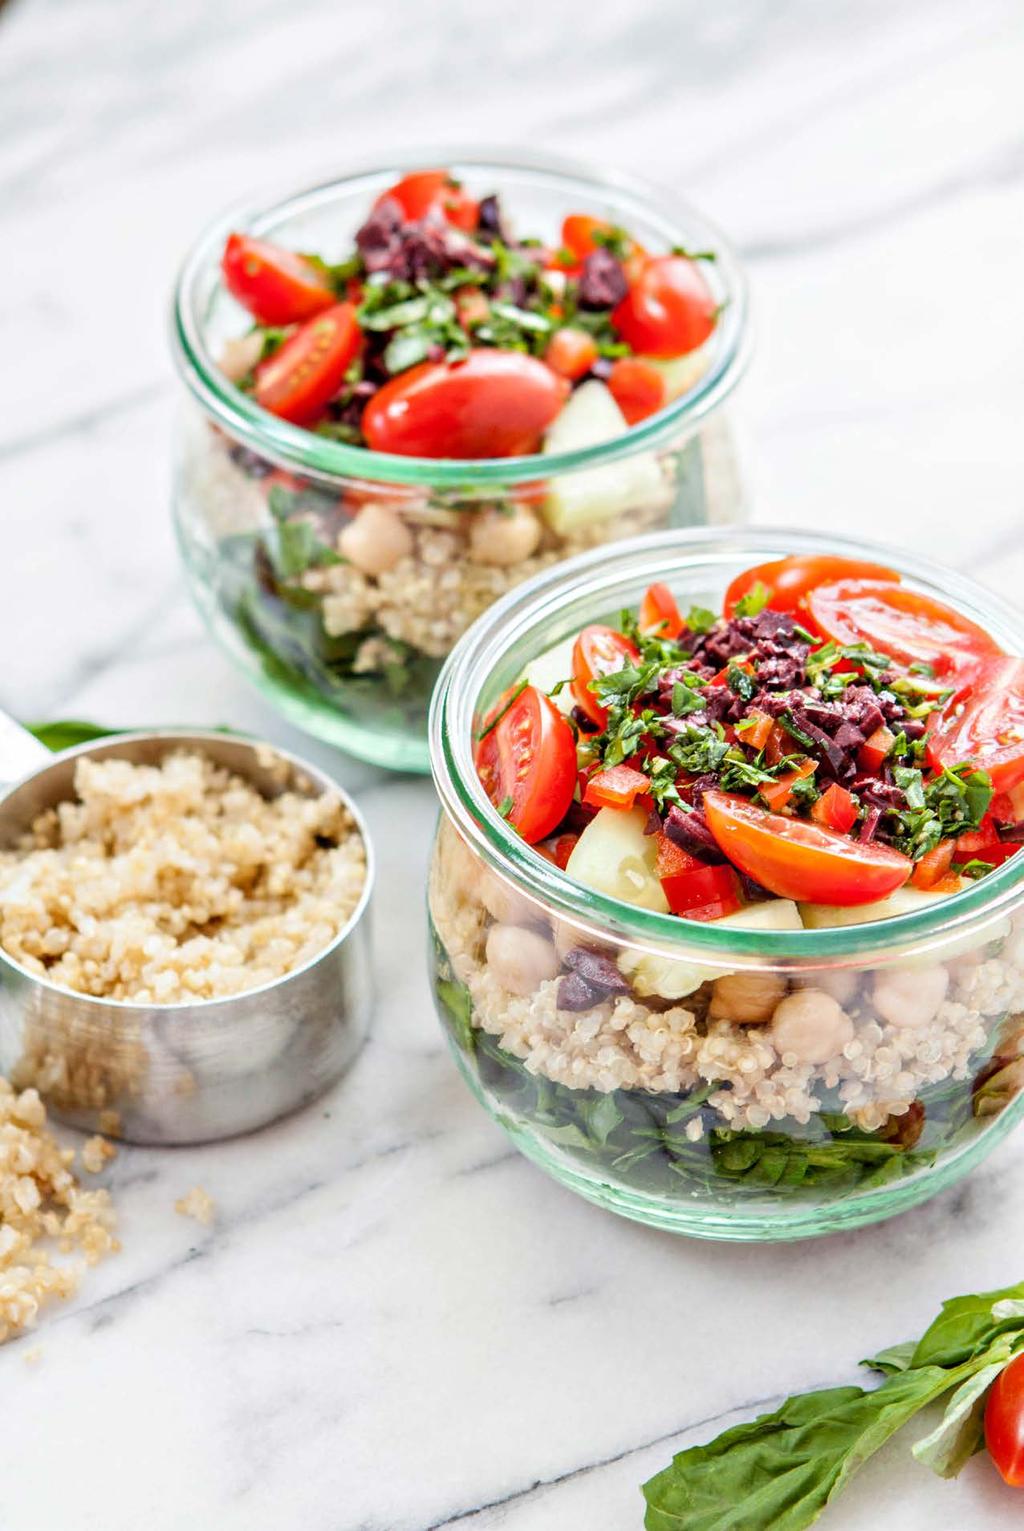 3. Tuscan Quinoa This filling Tuscan quinoa salad boasts all the benefits of the Mediterranean region. It s delicious hot or cold.